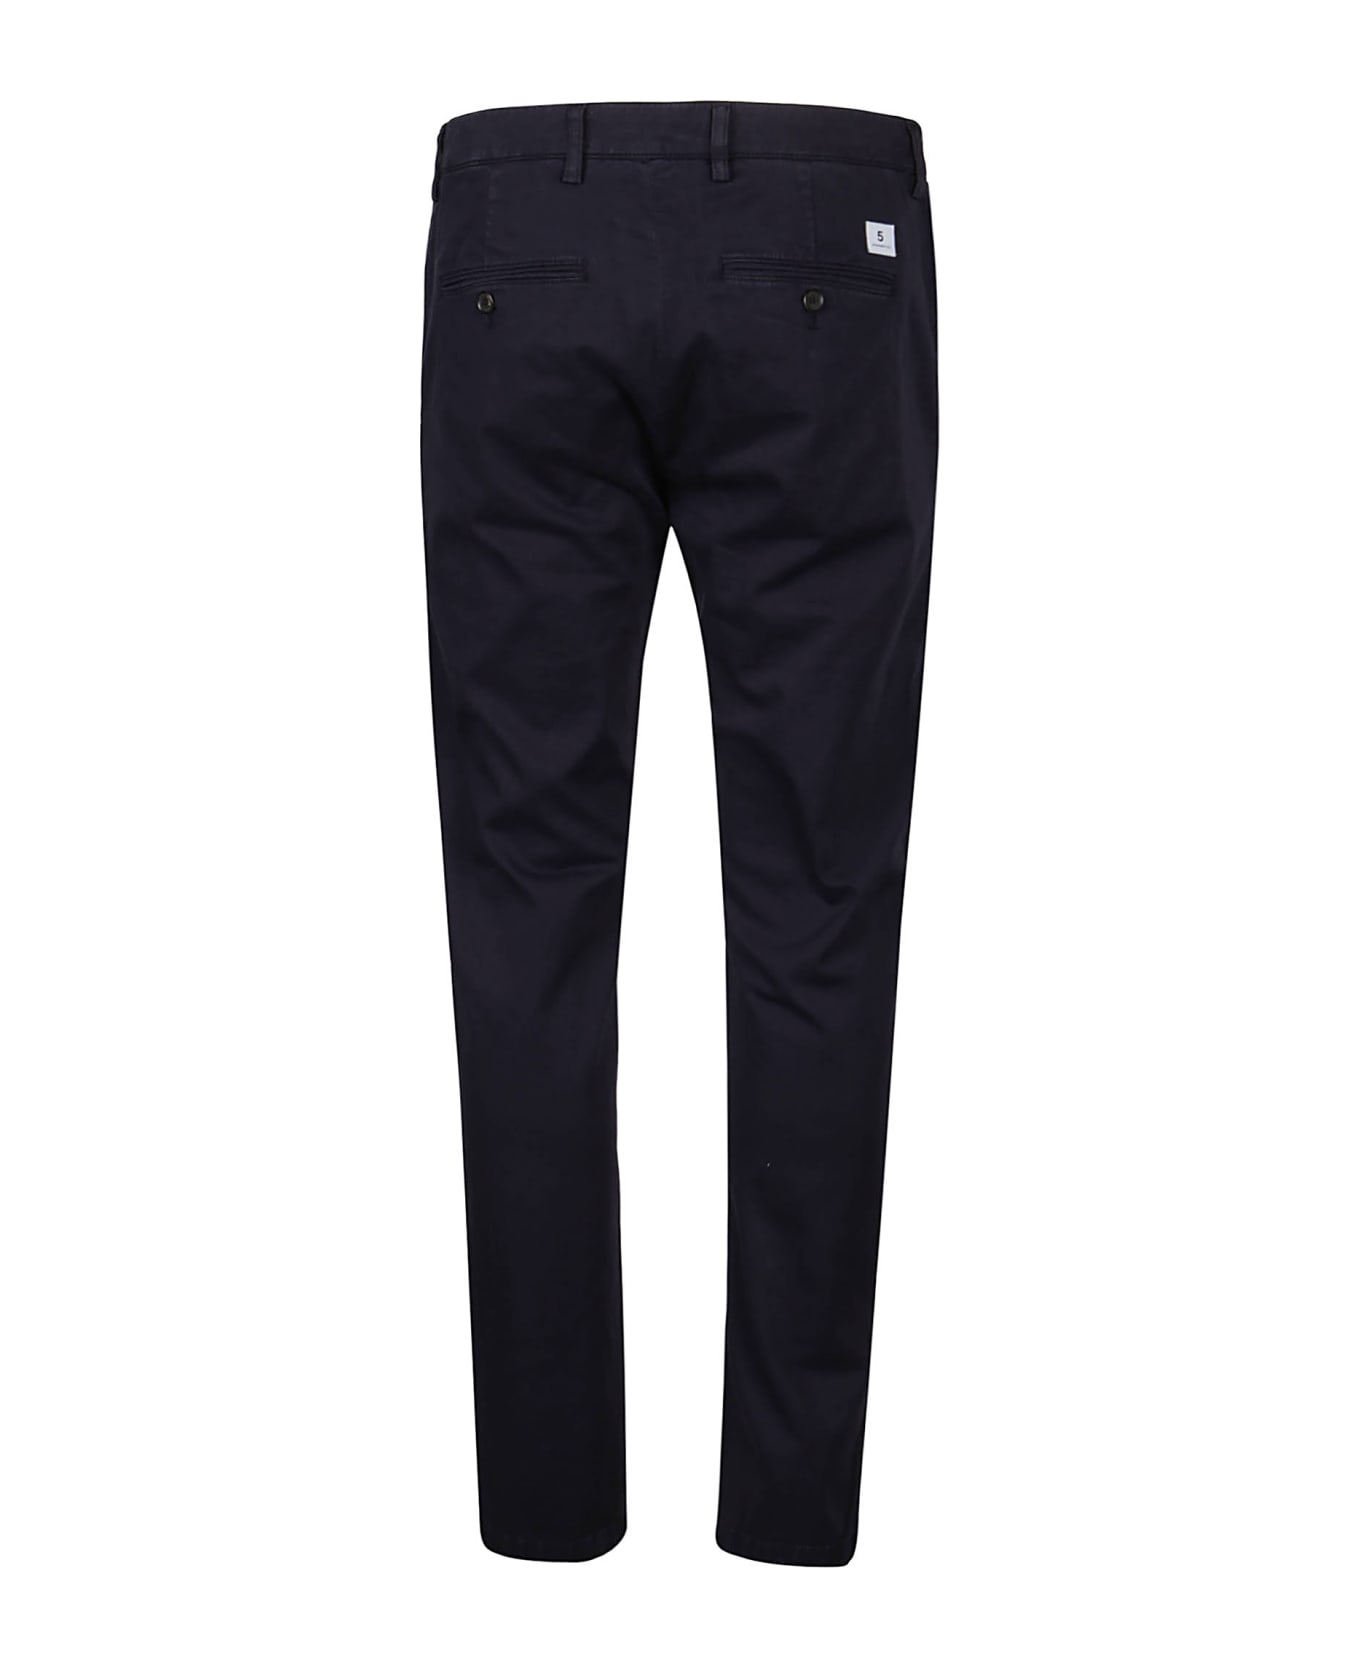 Department Five Mike Chinos Superslim Pant - Navy